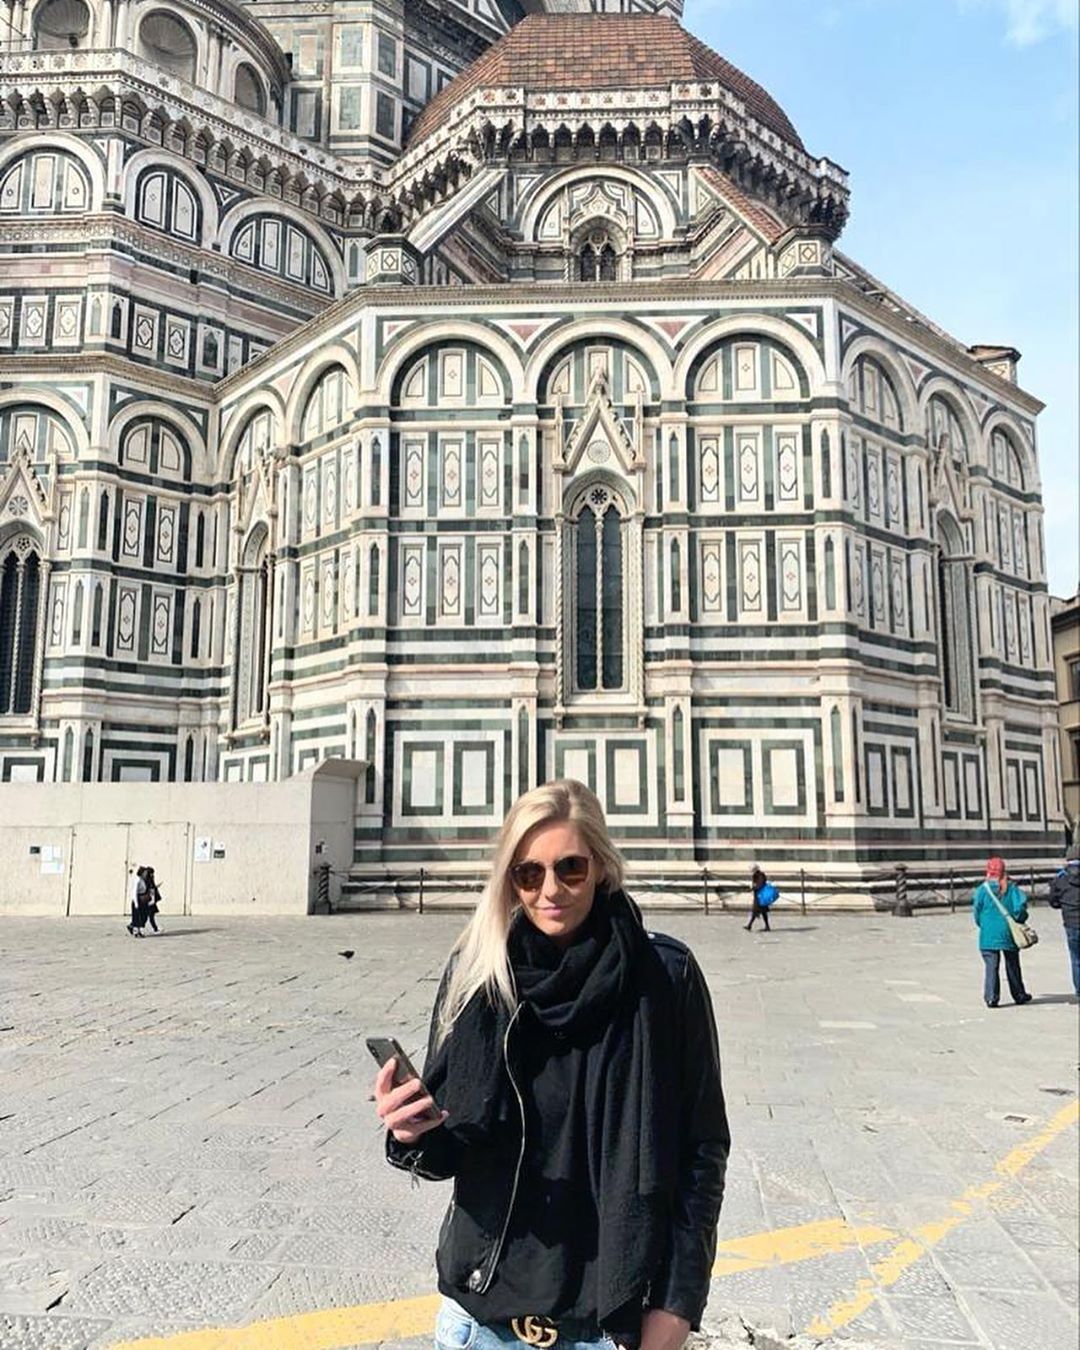 tourist at building in florence italy